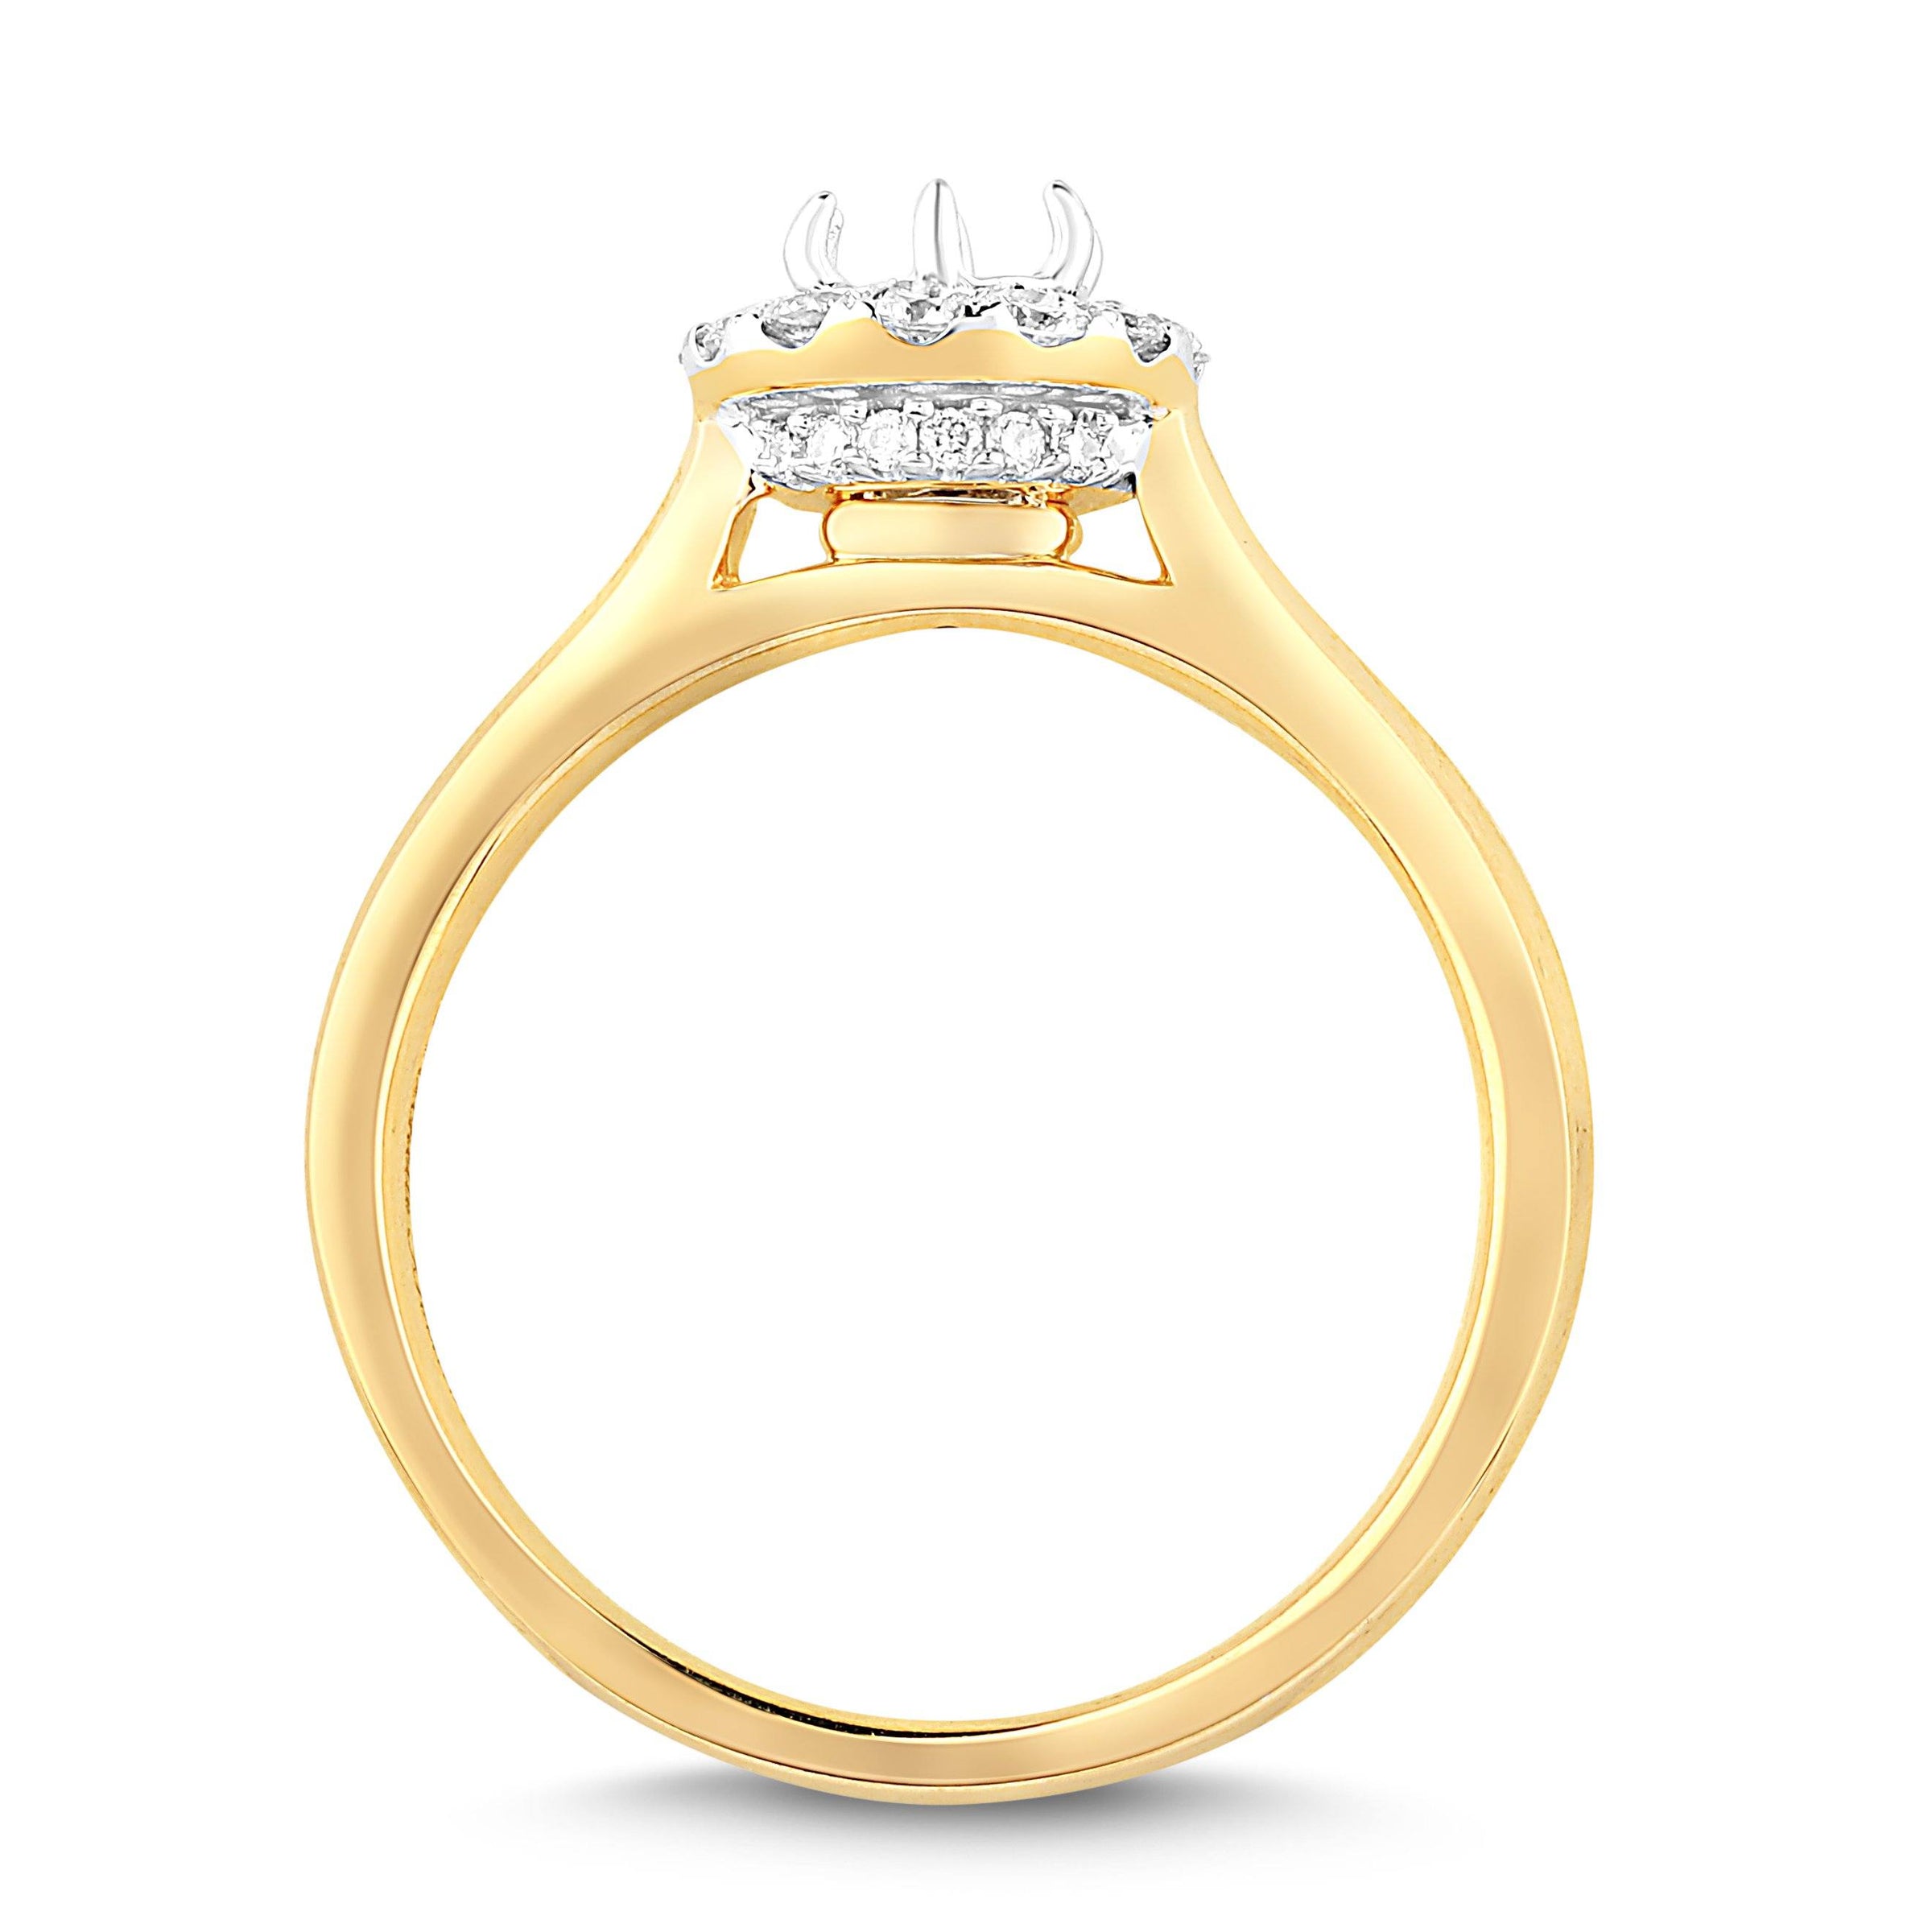 Love by Michelle Beville Halo Solitaire Ring with 0.55ct of Diamonds in 18ct Yellow Gold Rings Bevilles 